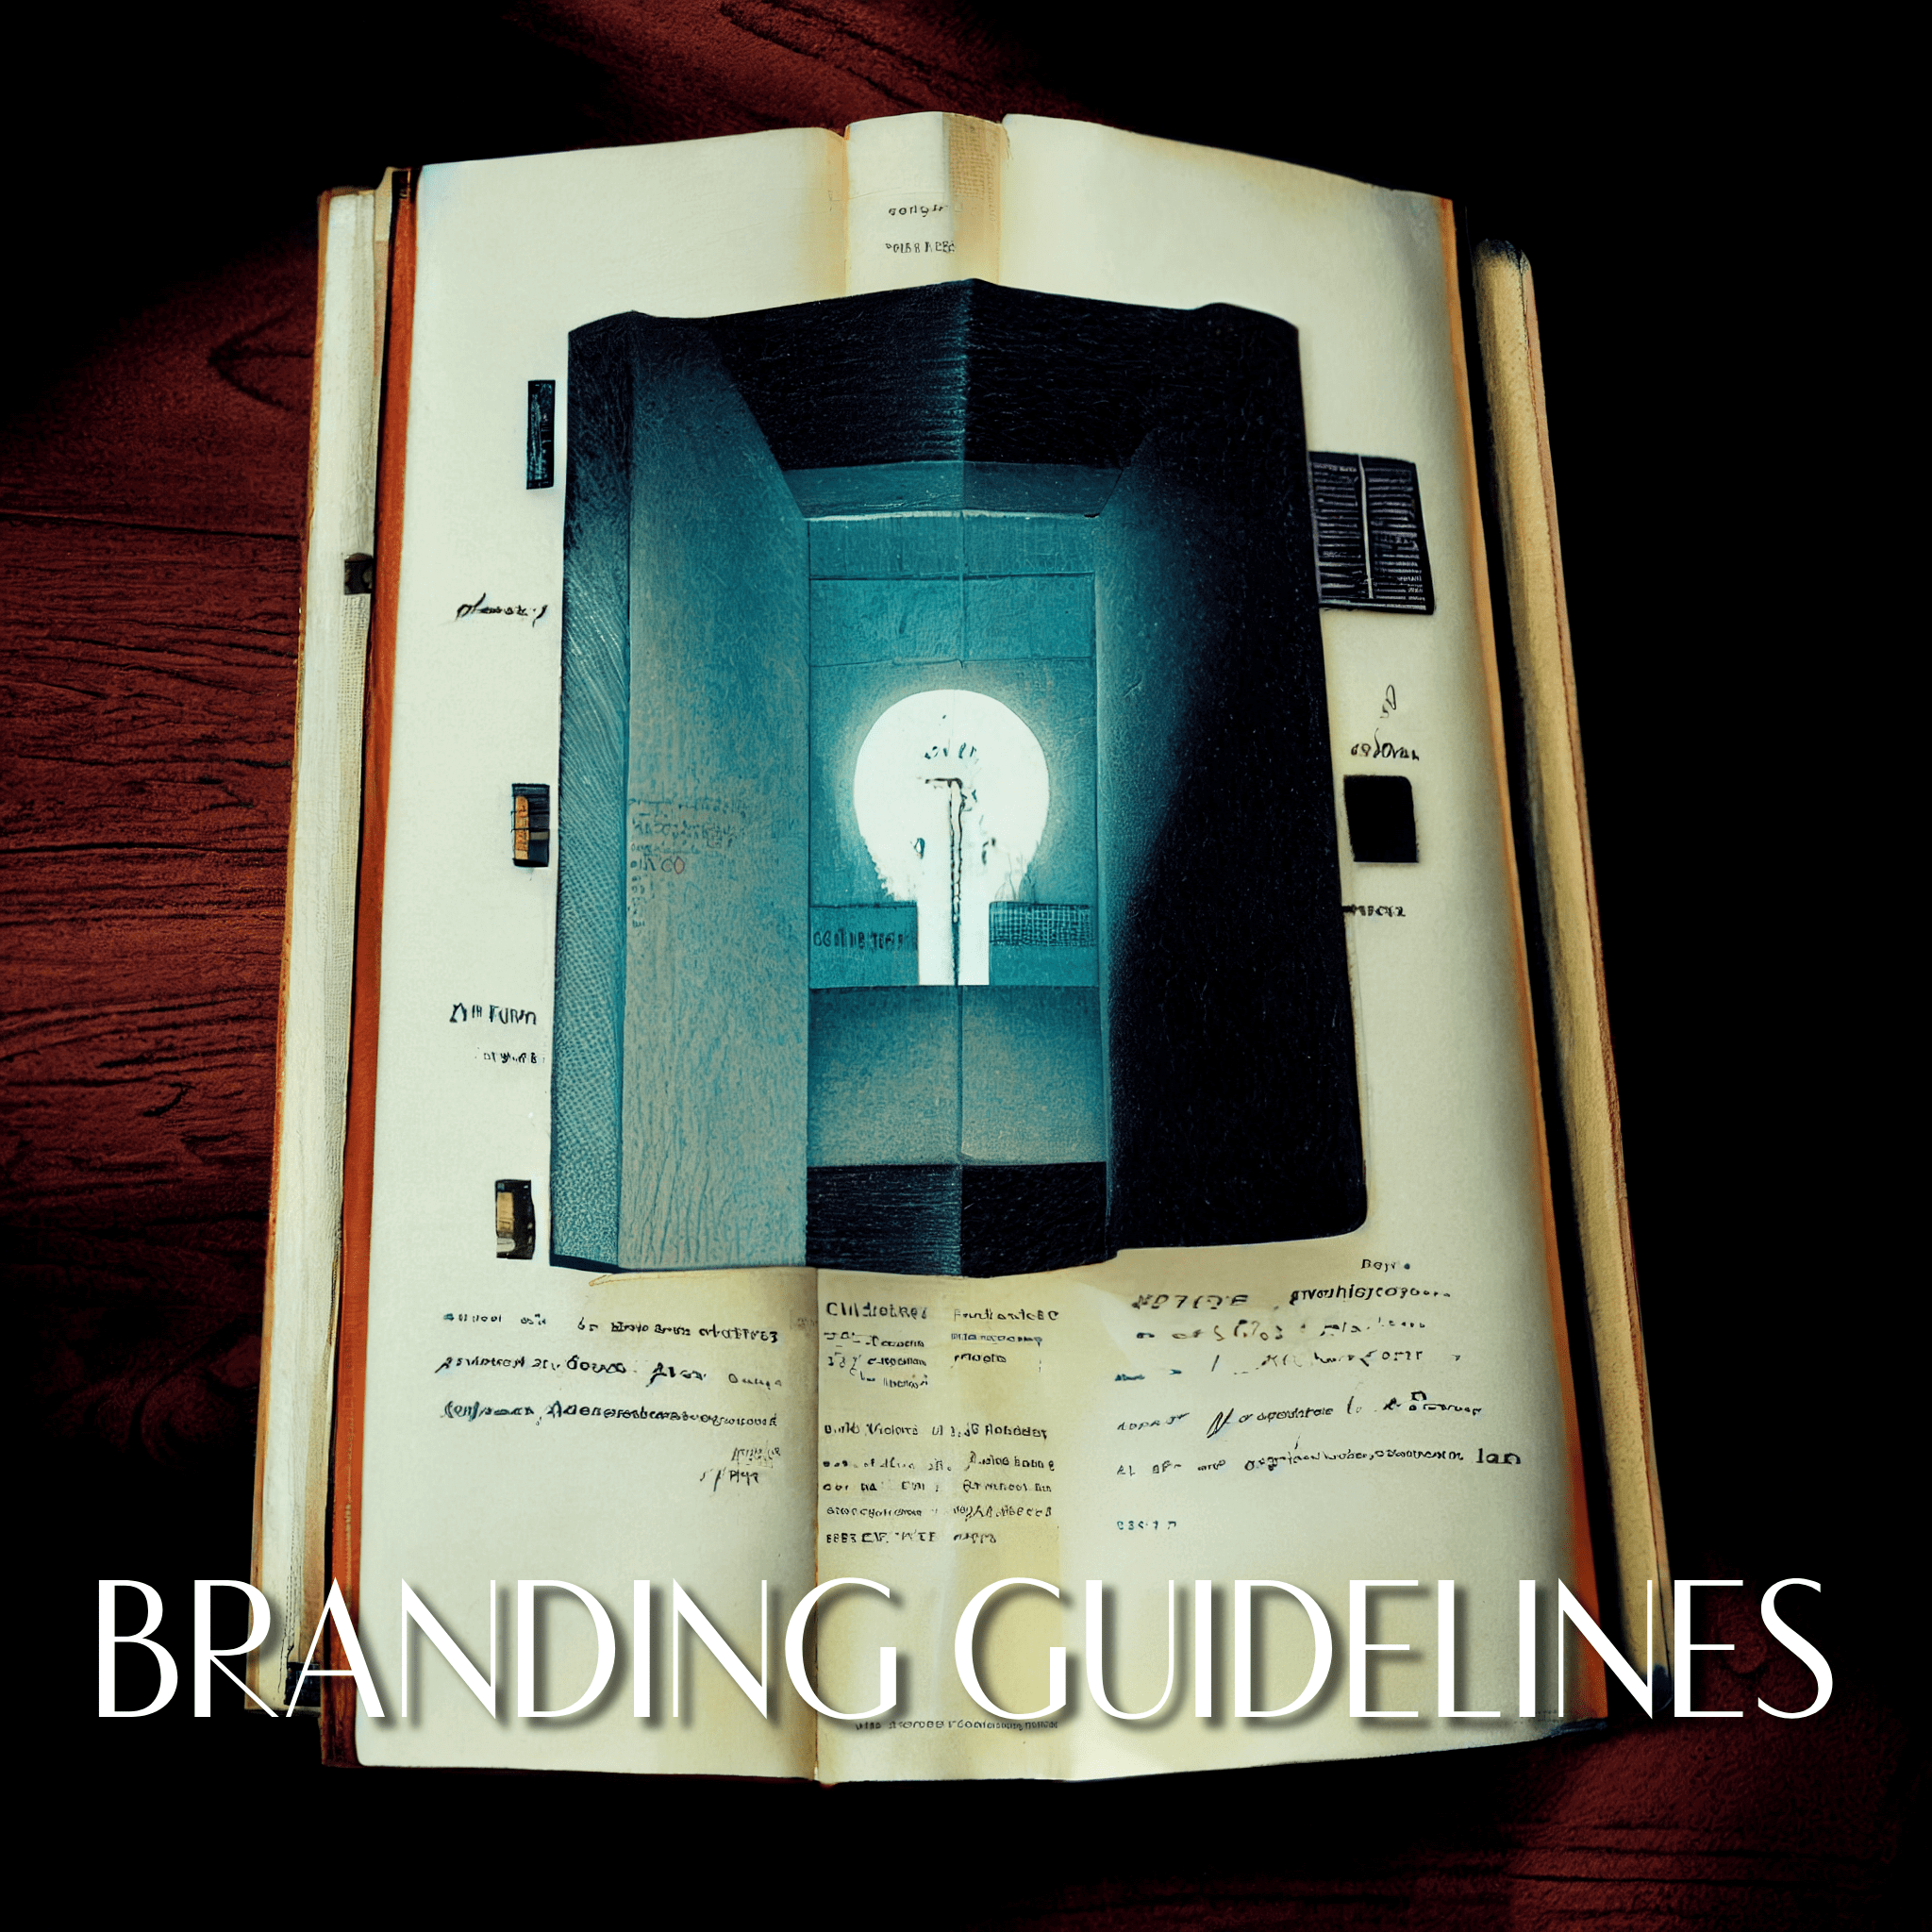 What are the Branding Guidelines?